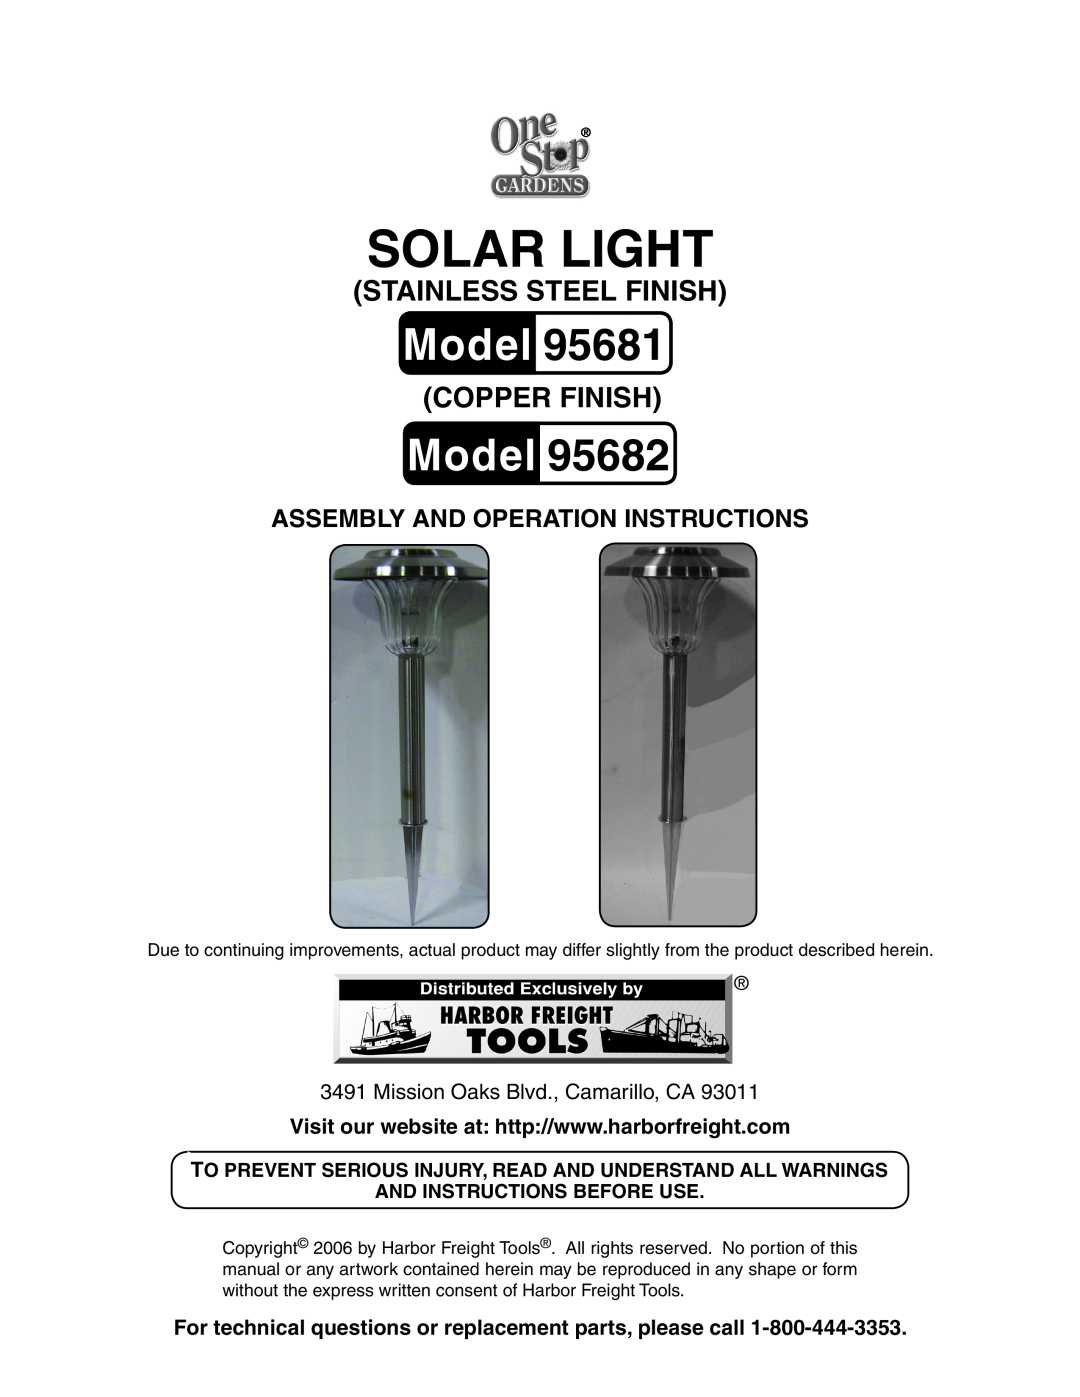 Harbor Freight Tools 95681 manual Stainless steel finish, Copper finish, Assembly And Operation Instructions, SOLAR Light 